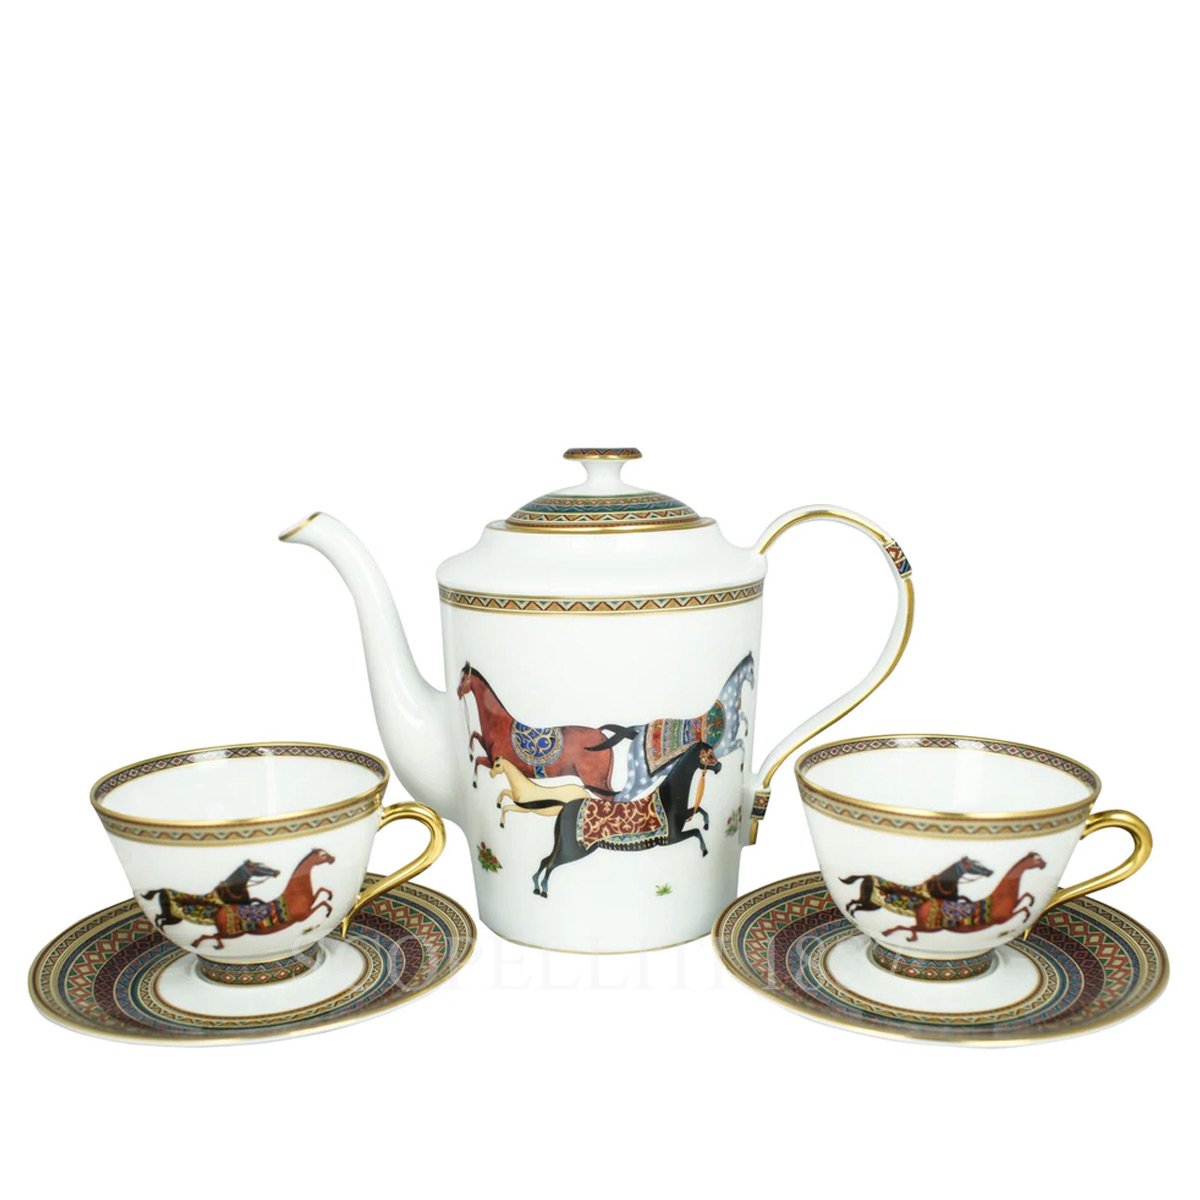 Hermes Set of 6 tea cups with saucers Cheval d'Orient - SCOPELLITI 1887